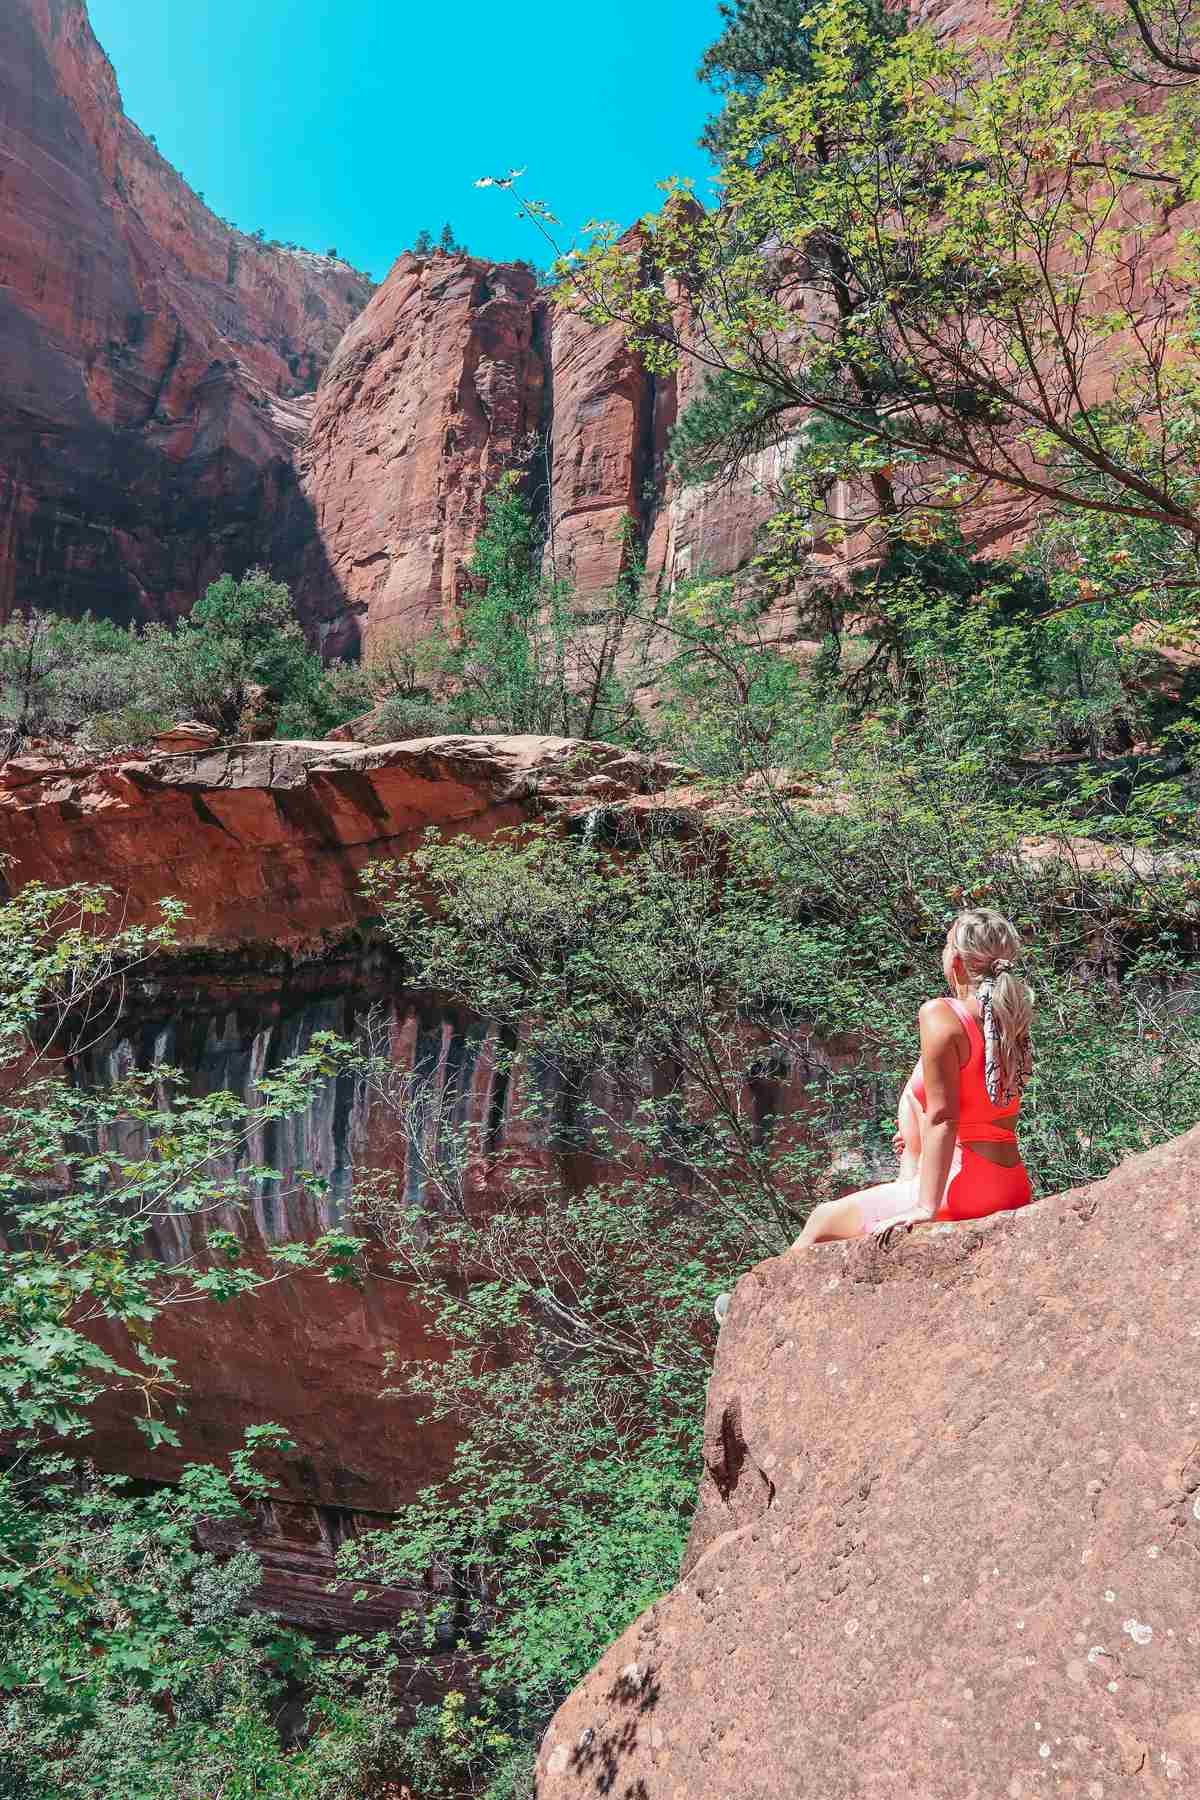 Enjoying the views of the Emerald Pools trail at Zion National Park